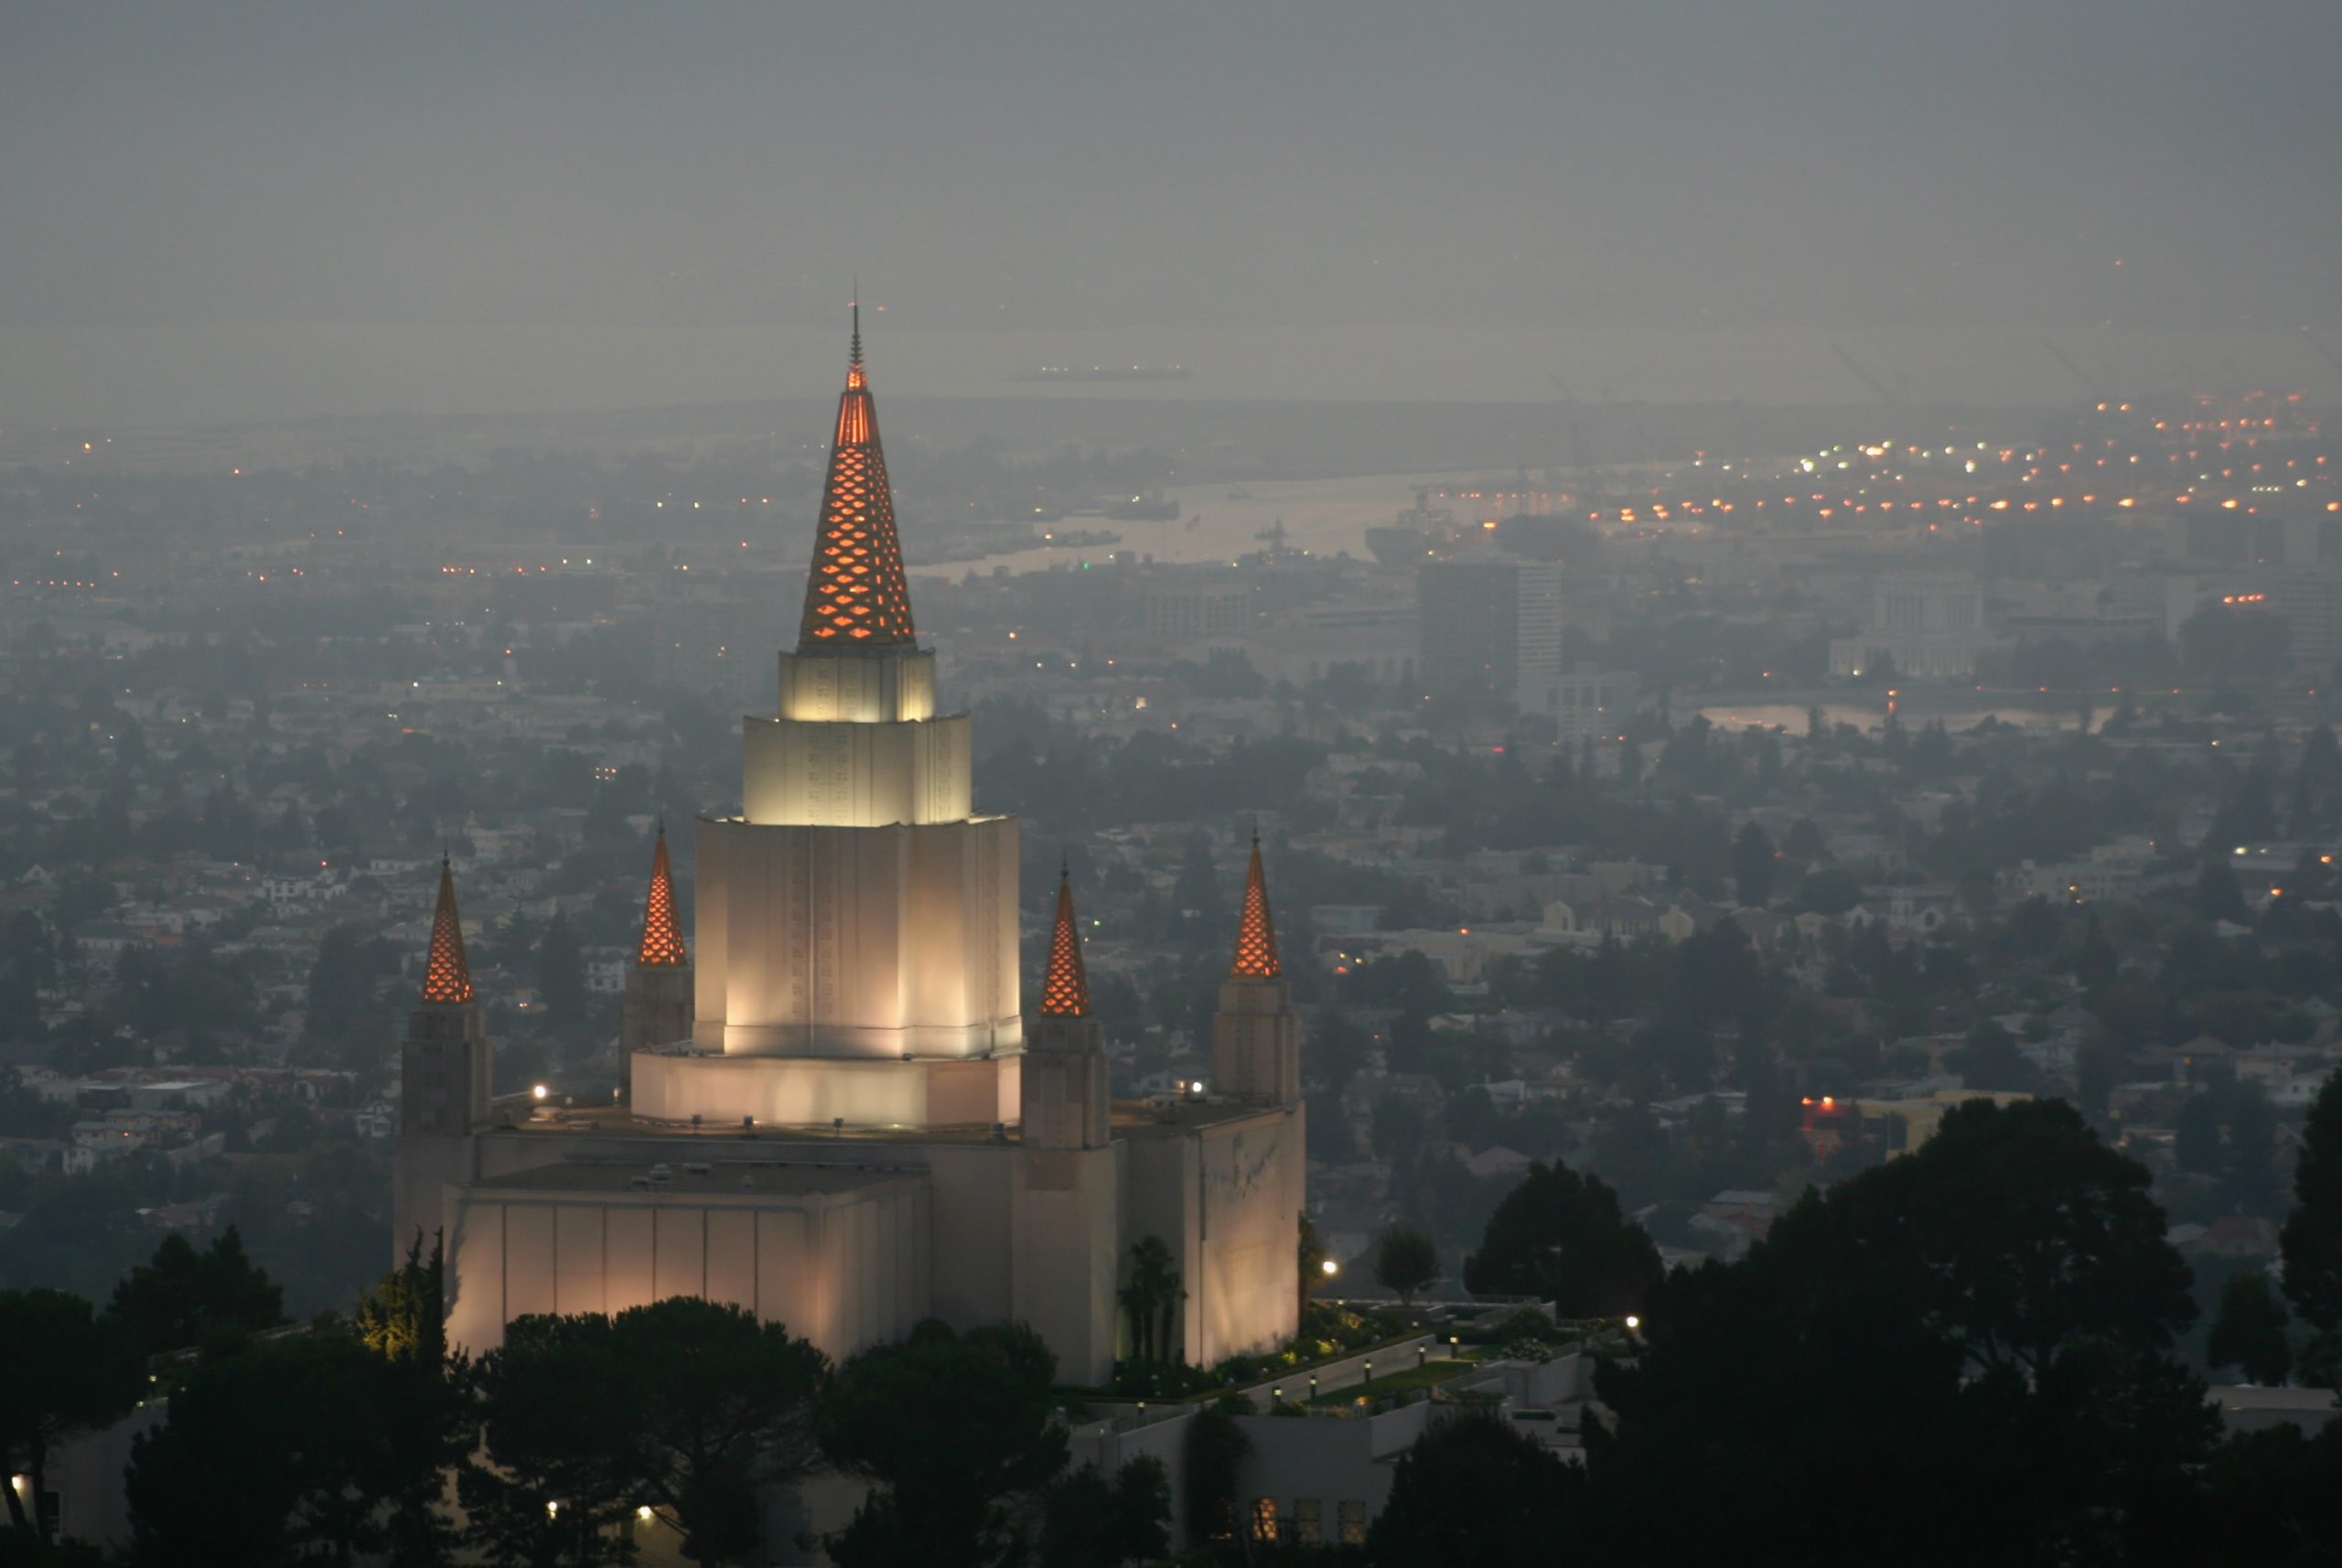 The Oakland California Temple of The Church of Jesus Christ of Latter-day Saints. (Wikipedia / Calibas)